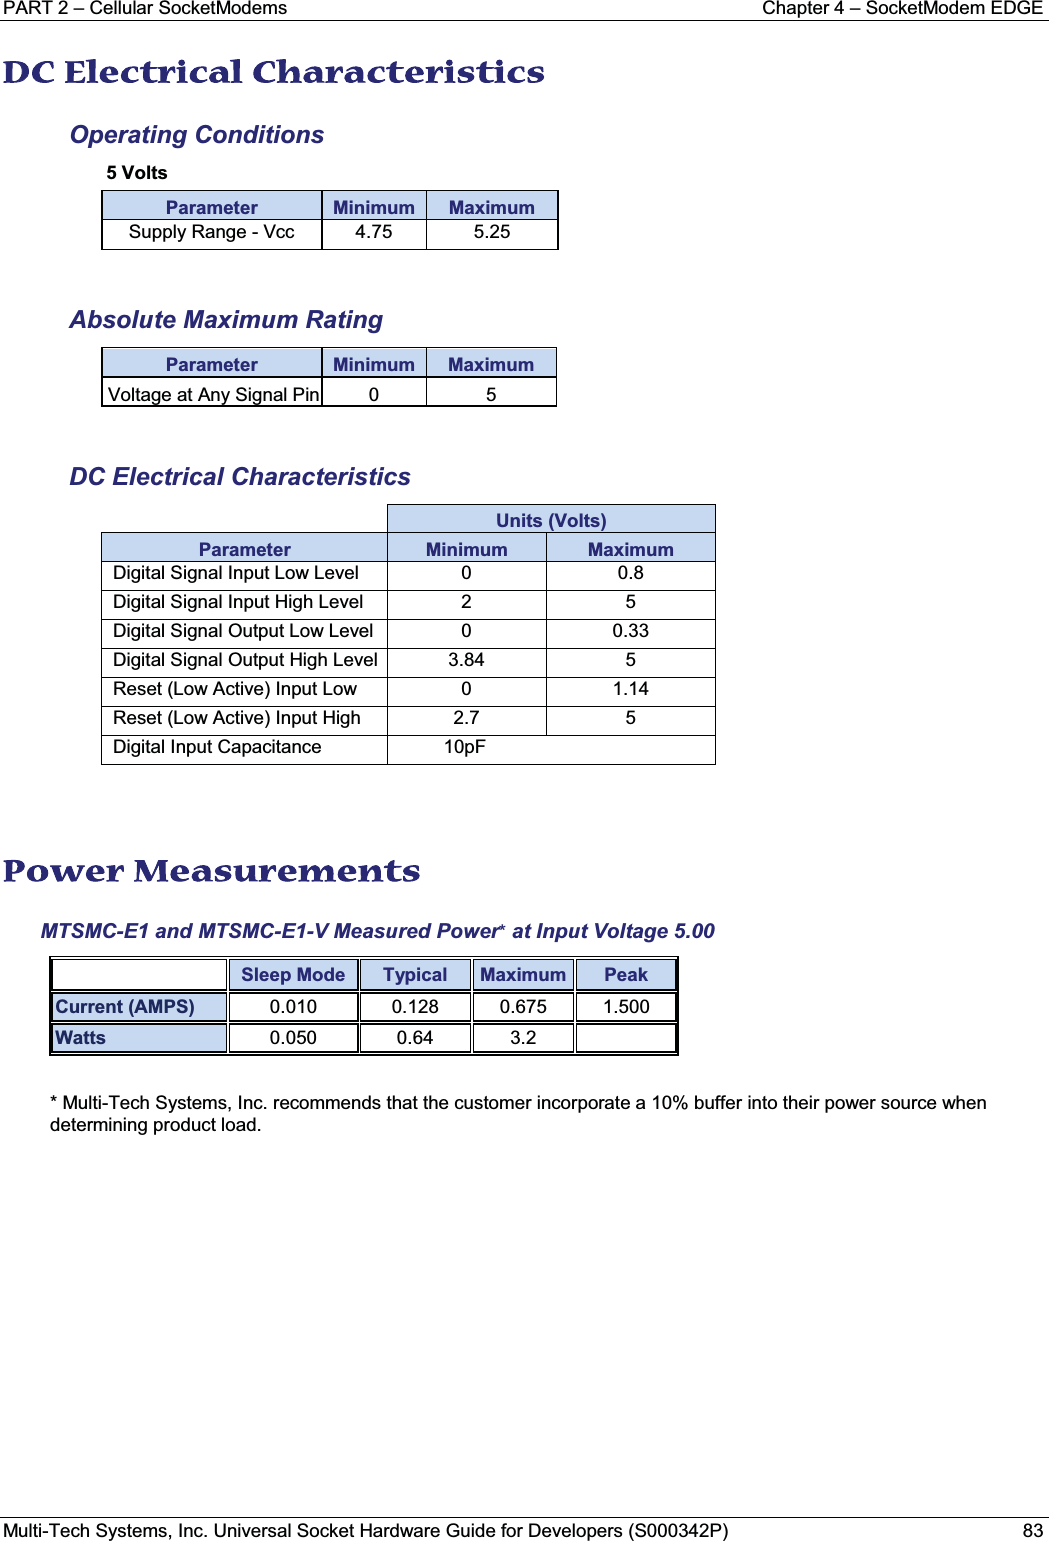 PART 2 – Cellular SocketModems Chapter 4 – SocketModem EDGEMulti-Tech Systems, Inc. Universal Socket Hardware Guide for Developers (S000342P) 83DDC Electrical Characteristics Operating Conditions5 VoltsParameter Minimum MaximumSupply Range - Vcc 4.75 5.25Absolute Maximum RatingParameter Minimum MaximumVoltage at Any Signal Pin 0 5DC Electrical CharacteristicsUnits (Volts)Parameter Minimum MaximumDigital Signal Input Low Level 0 0.8Digital Signal Input High Level 2 5Digital Signal Output Low Level 0 0.33Digital Signal Output High Level 3.84 5Reset (Low Active) Input Low 0 1.14Reset (Low Active) Input High 2.7 5Digital Input Capacitance 10pFPower Measurements MTSMC-E1 and MTSMC-E1-V Measured Power*at Input Voltage 5.00Sleep Mode Typical Maximum PeakCurrent (AMPS) 0.010 0.128 0.675 1.500Watts 0.050 0.64 3.2* Multi-Tech Systems, Inc. recommends that the customer incorporate a 10% buffer into their power source when determining product load.